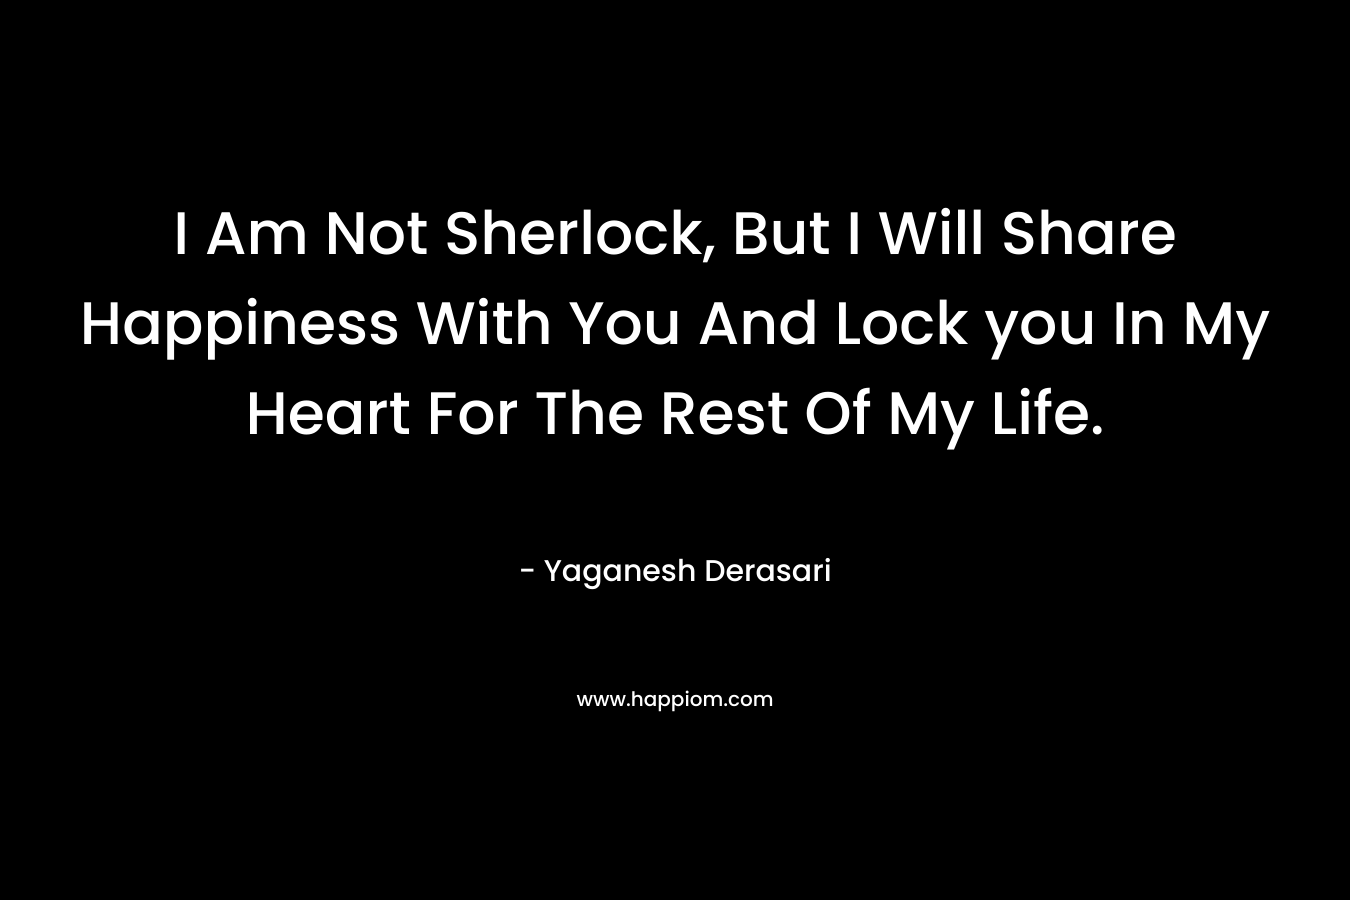 I Am Not Sherlock, But I Will Share Happiness With You And Lock you In My Heart For The Rest Of My Life.